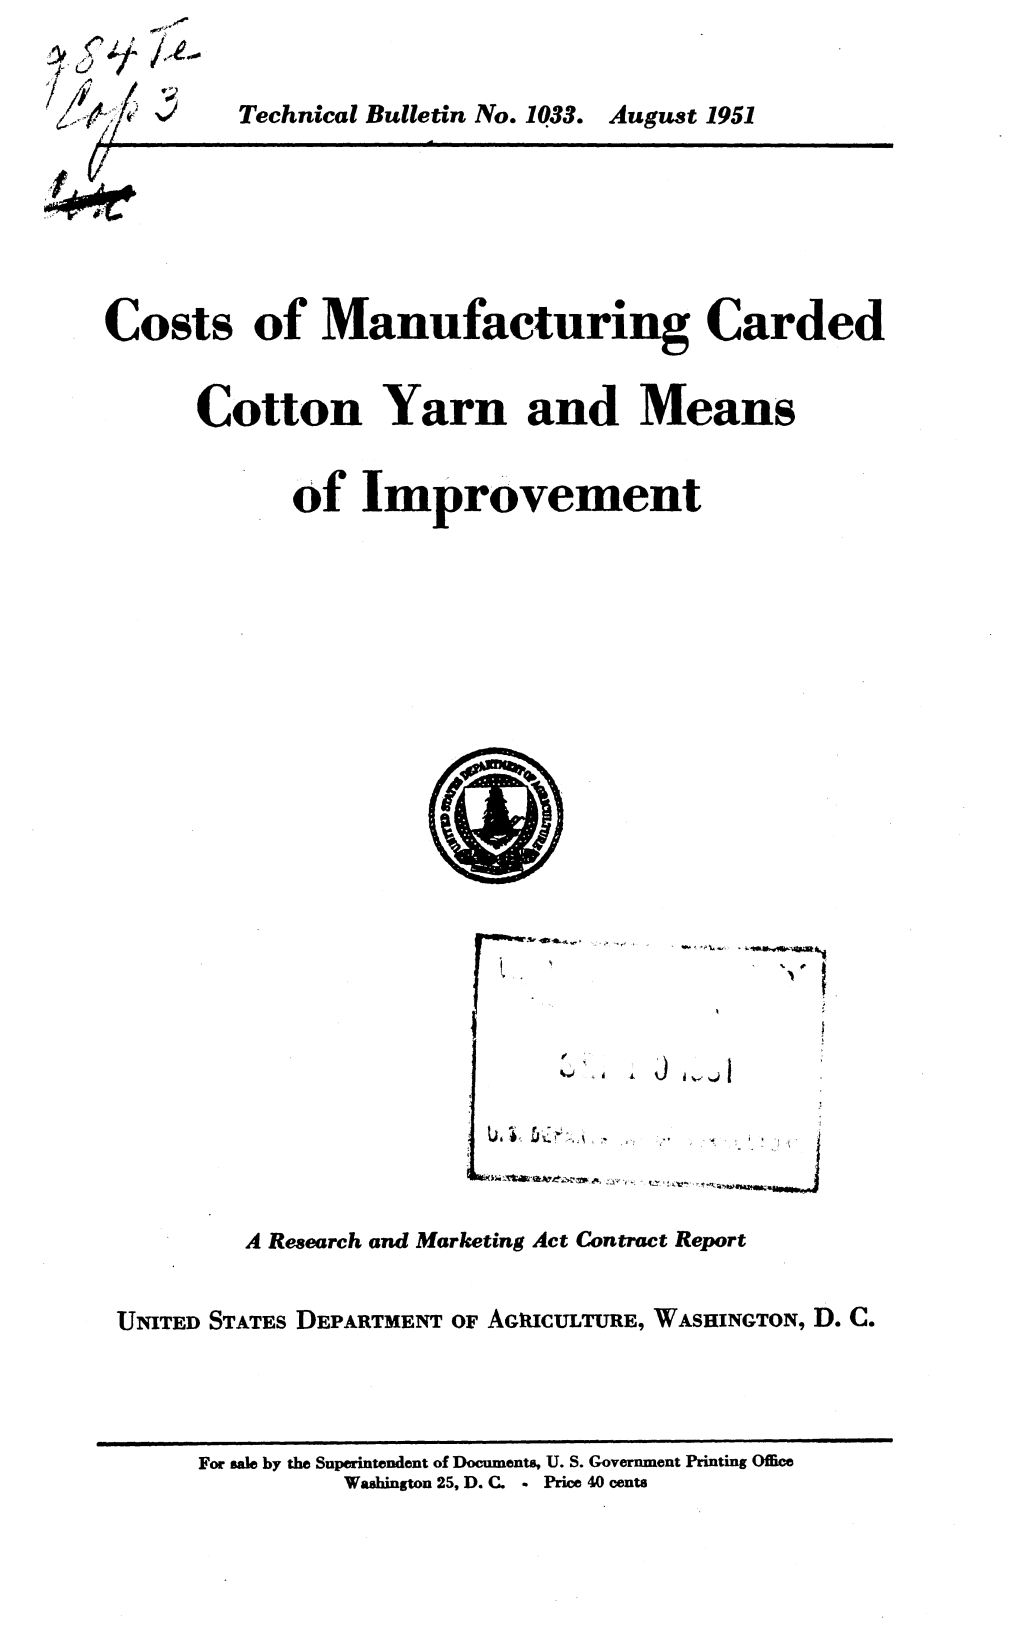 Costs of Manufacturing Carded Cotton Yarn and Means of Improvement